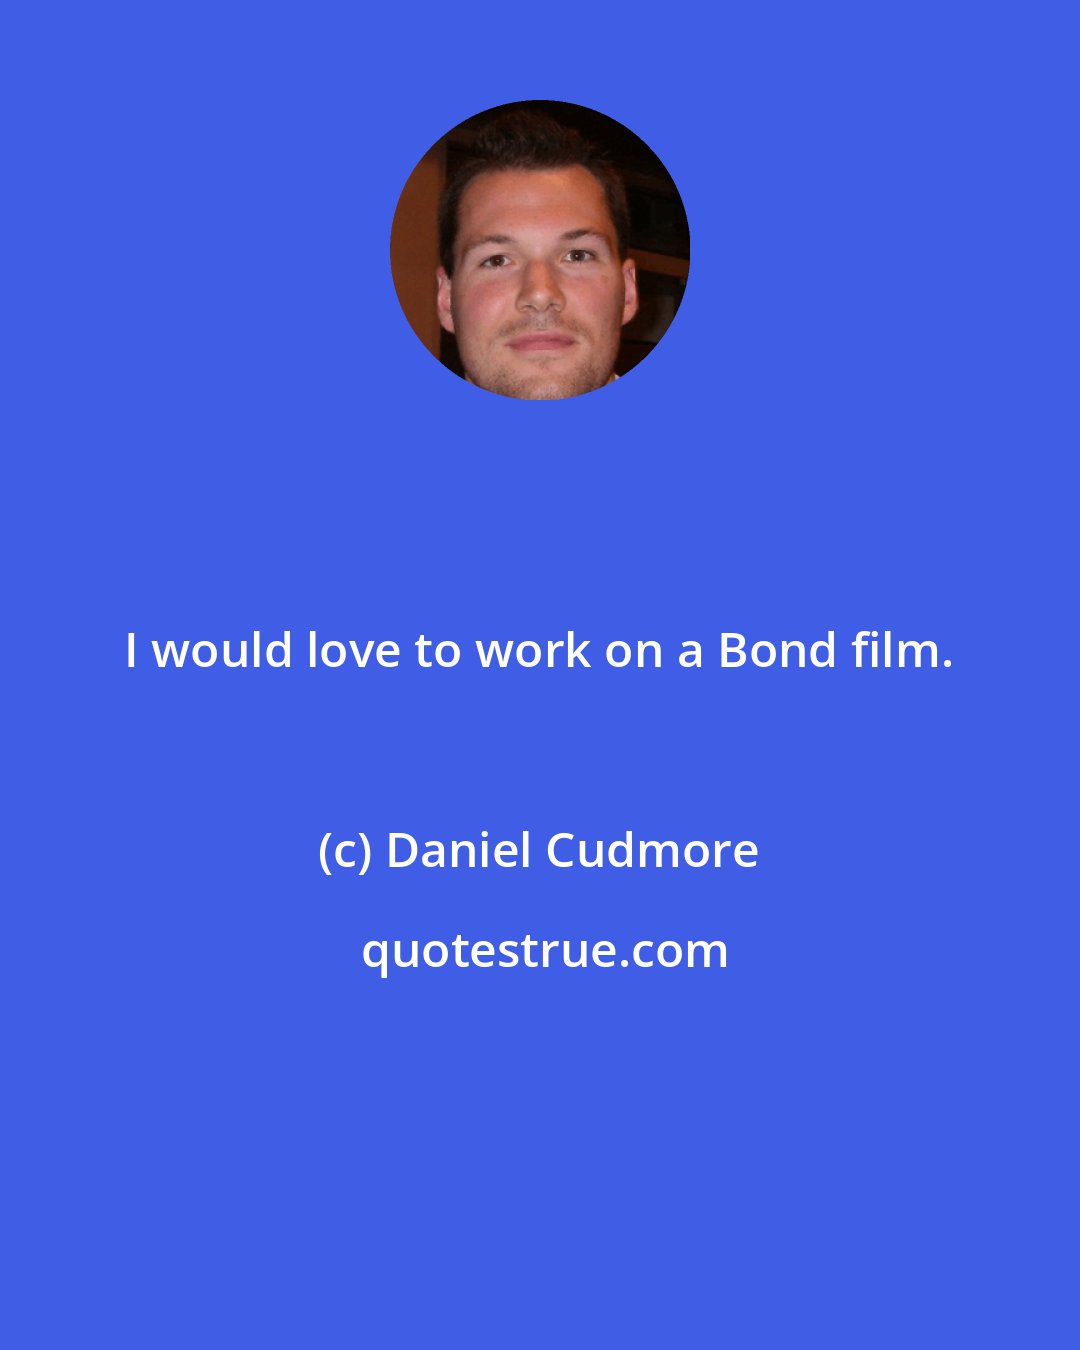 Daniel Cudmore: I would love to work on a Bond film.